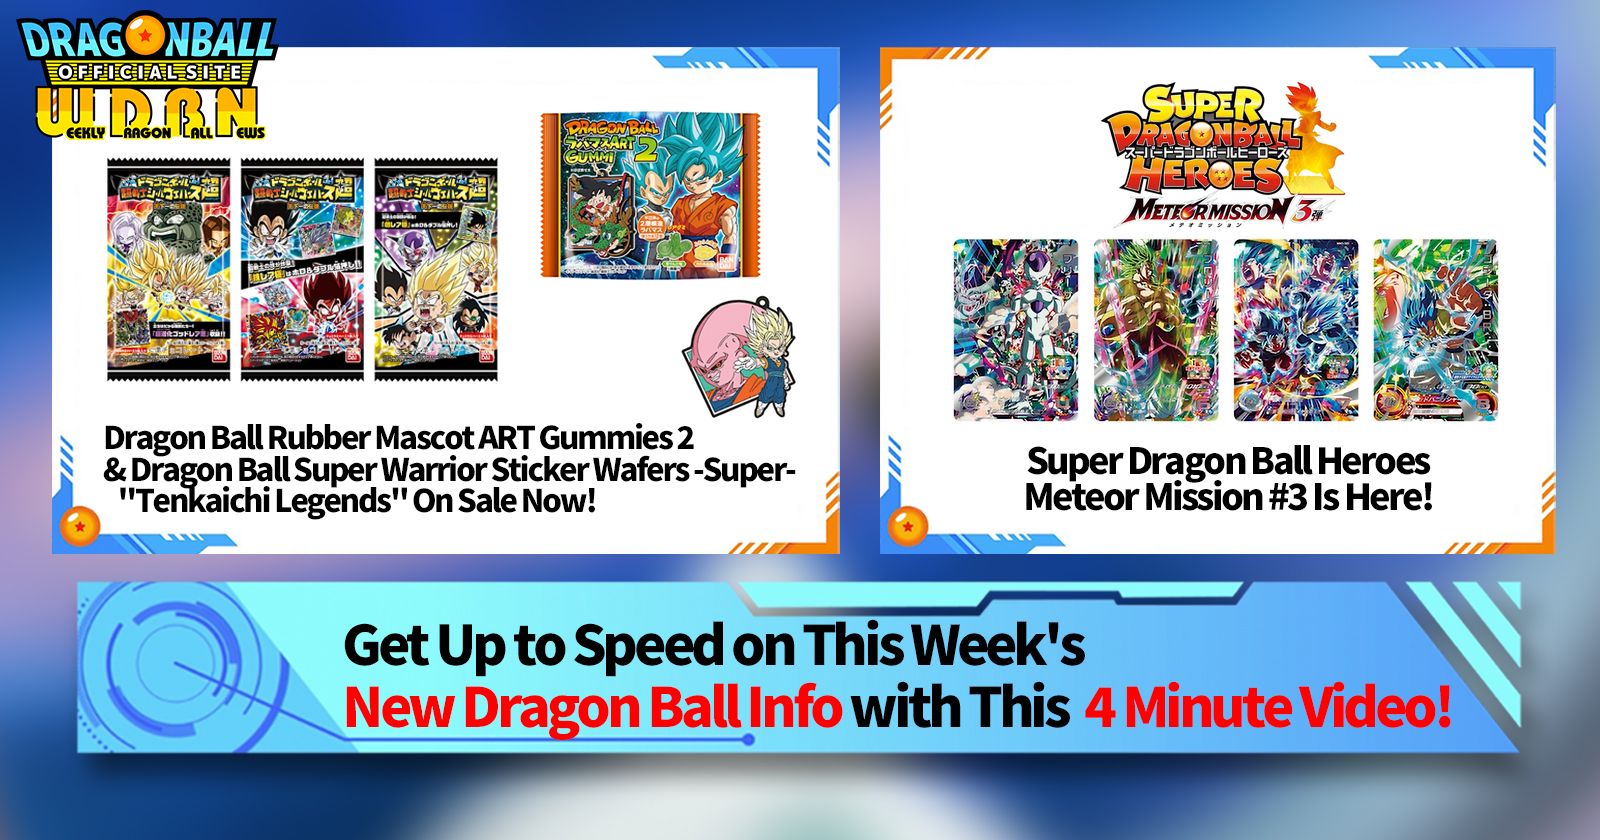 [March 11th] Weekly Dragon Ball News Broadcast!